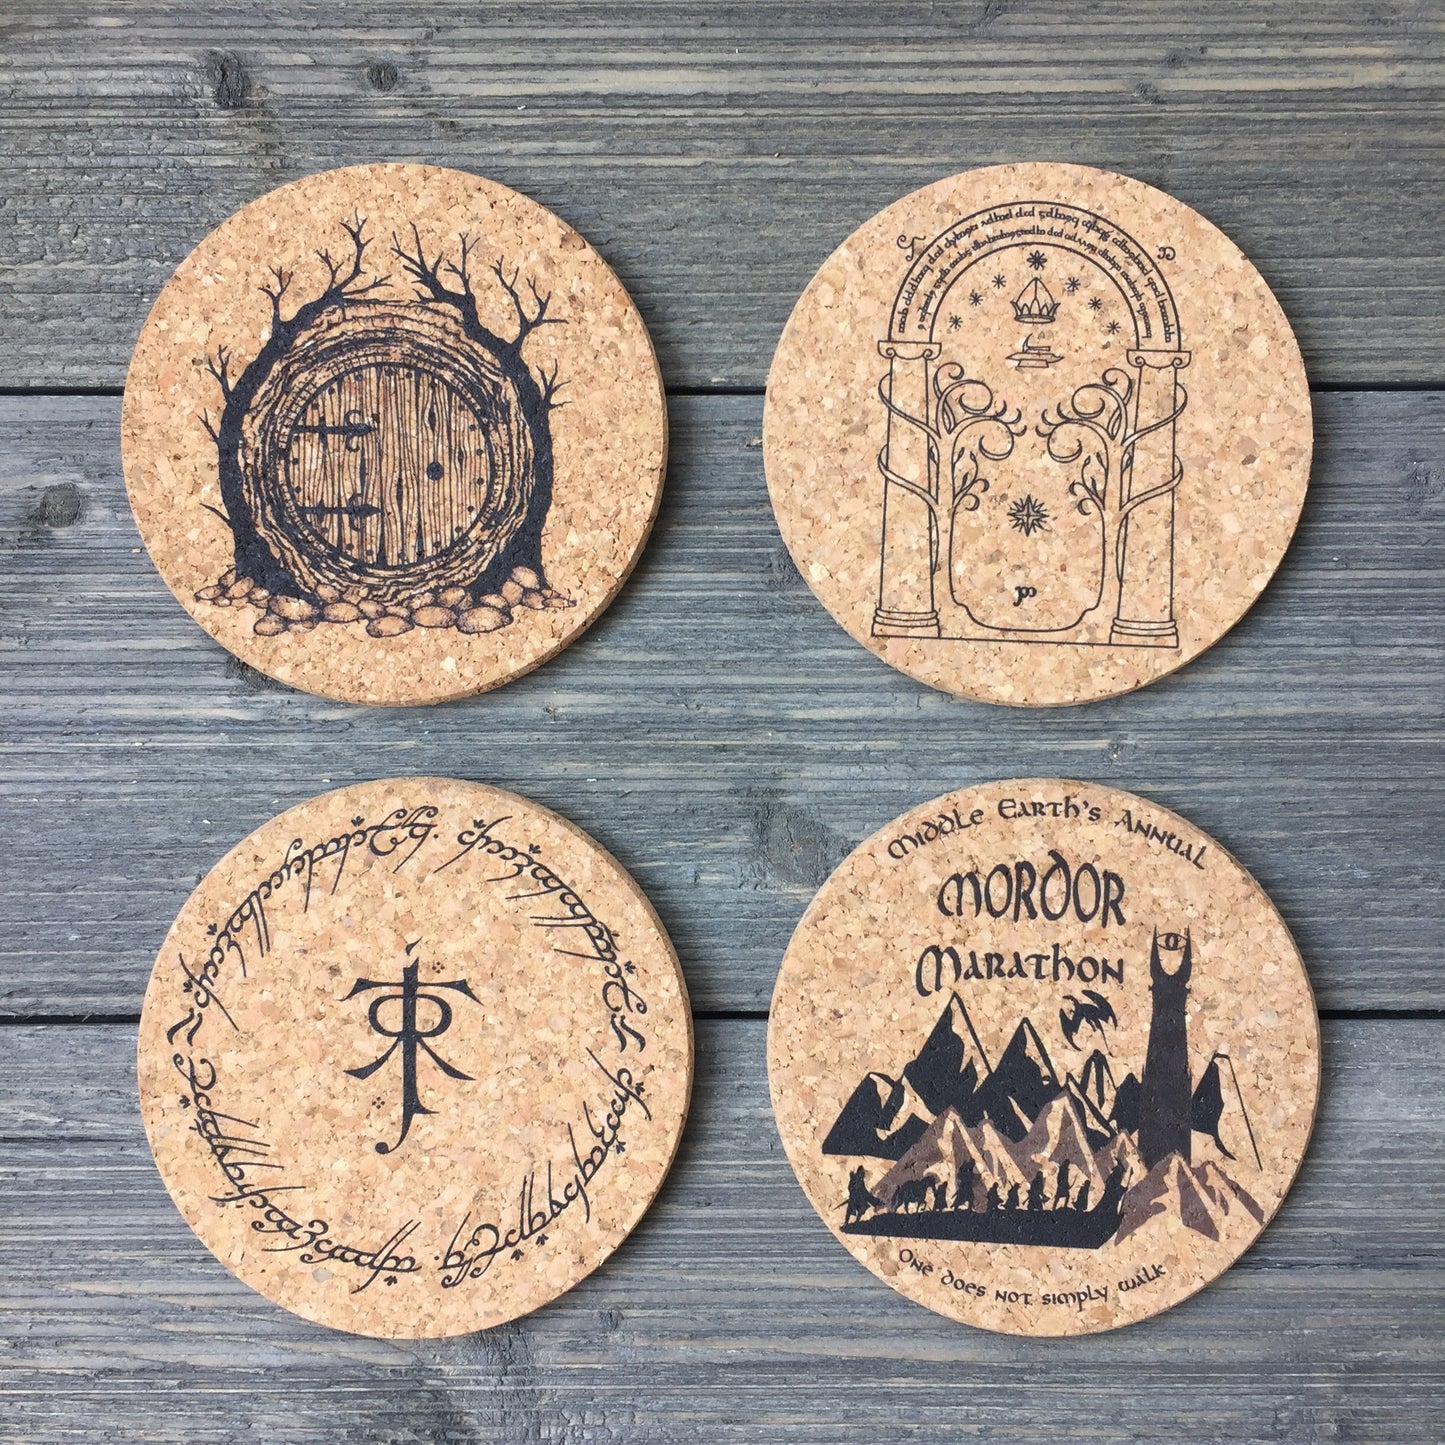 Lord of the Rings Cork Coaster Set of 4